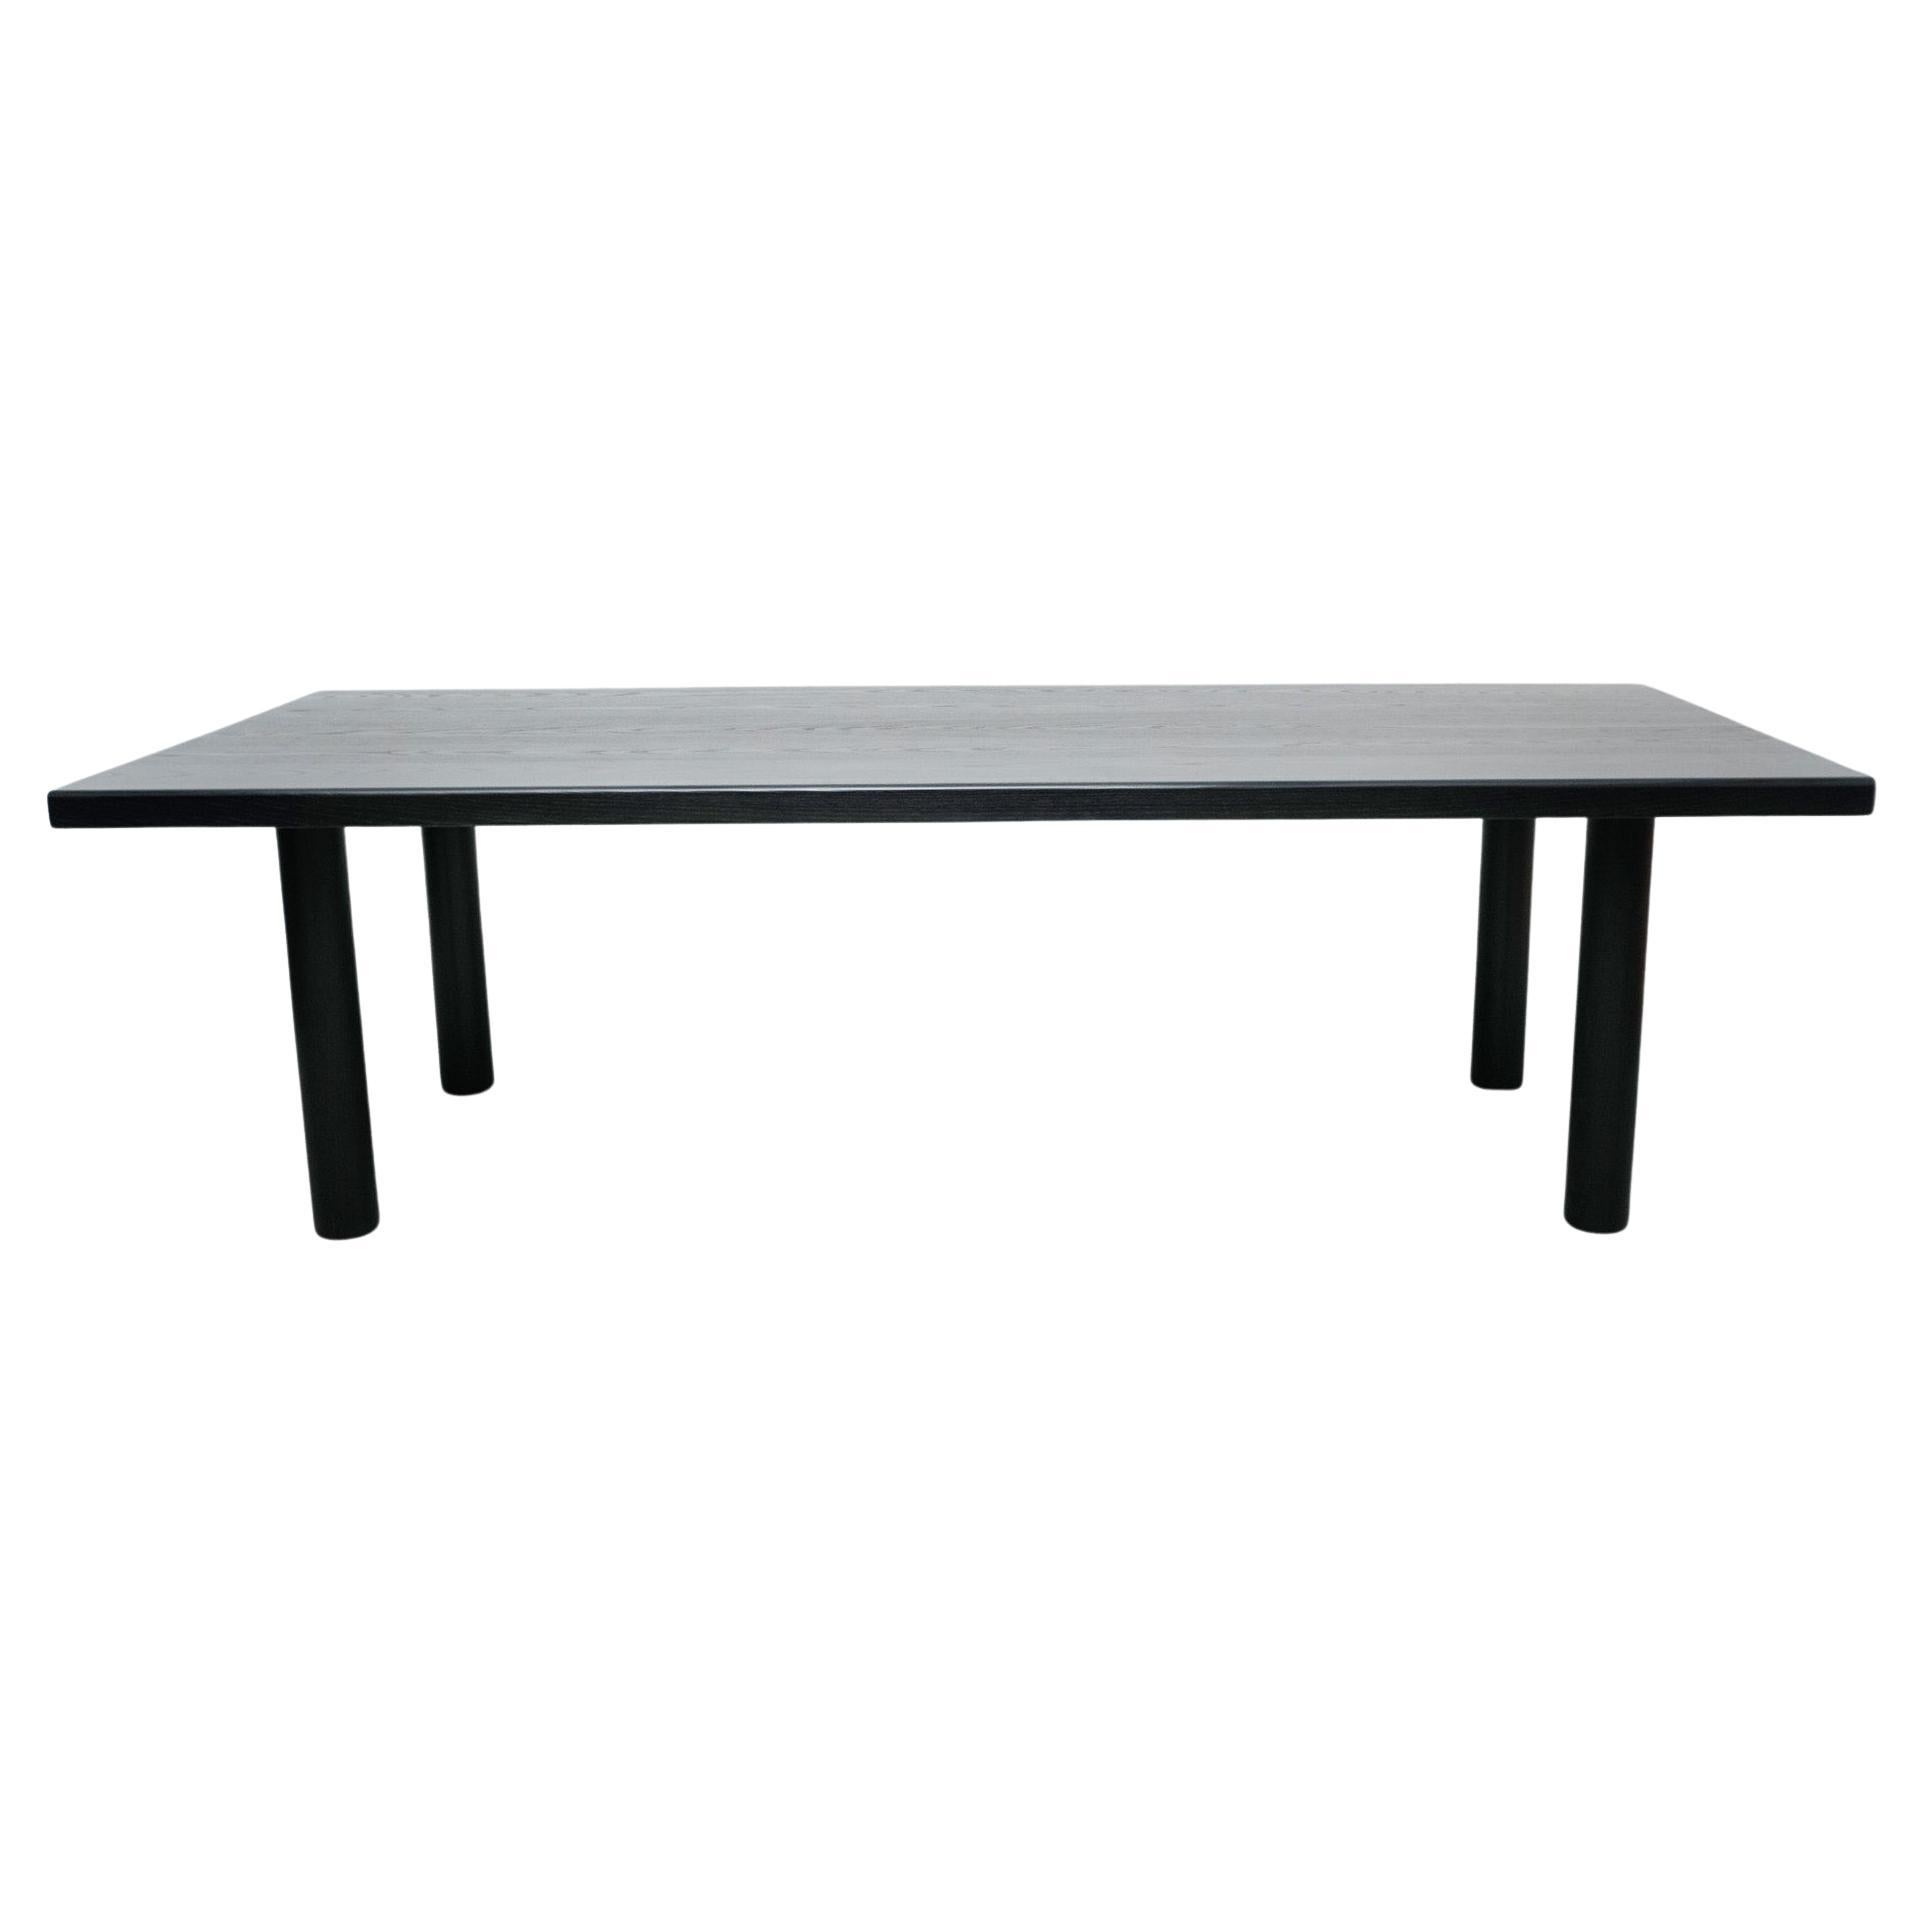 Large dining table by Dada est. manufactured in Barcelona.

Solid ash lacquered black.

Measures: 106 cm D x 260 cm W x 76 cm H 

There is the possibility of making it in different measures and woods.

Dada Est. Makes a handmade furniture